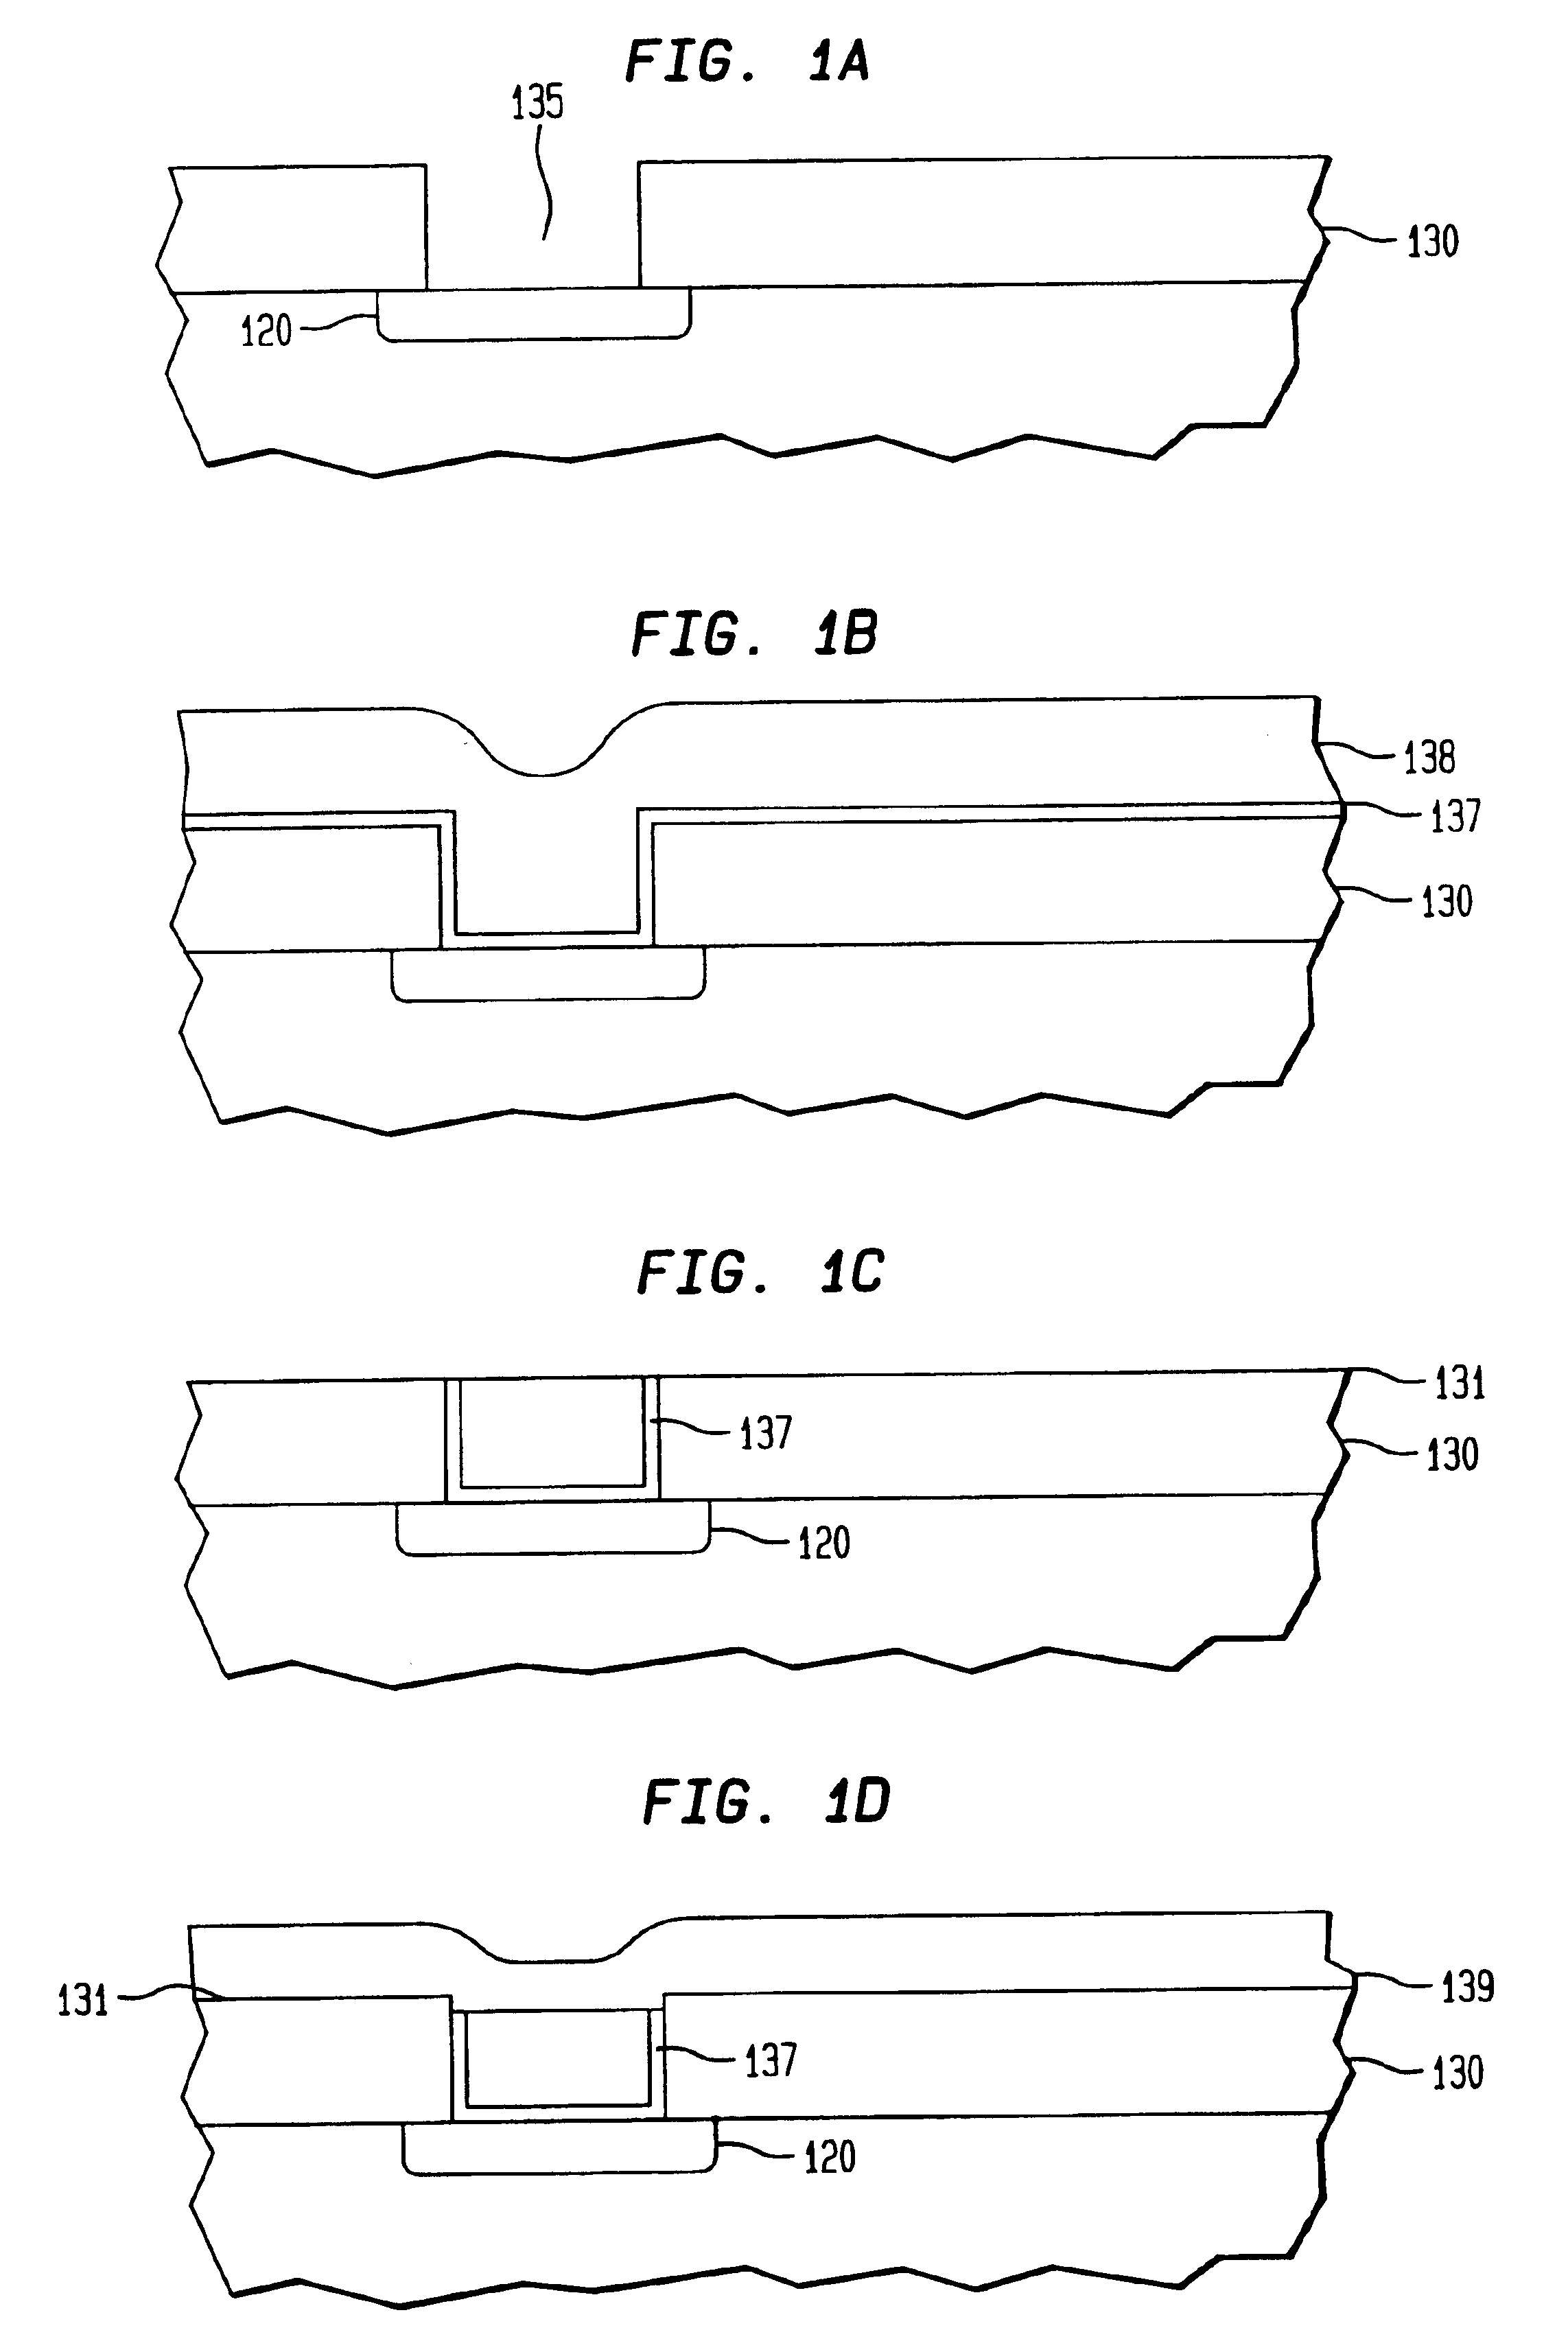 Device interconnection